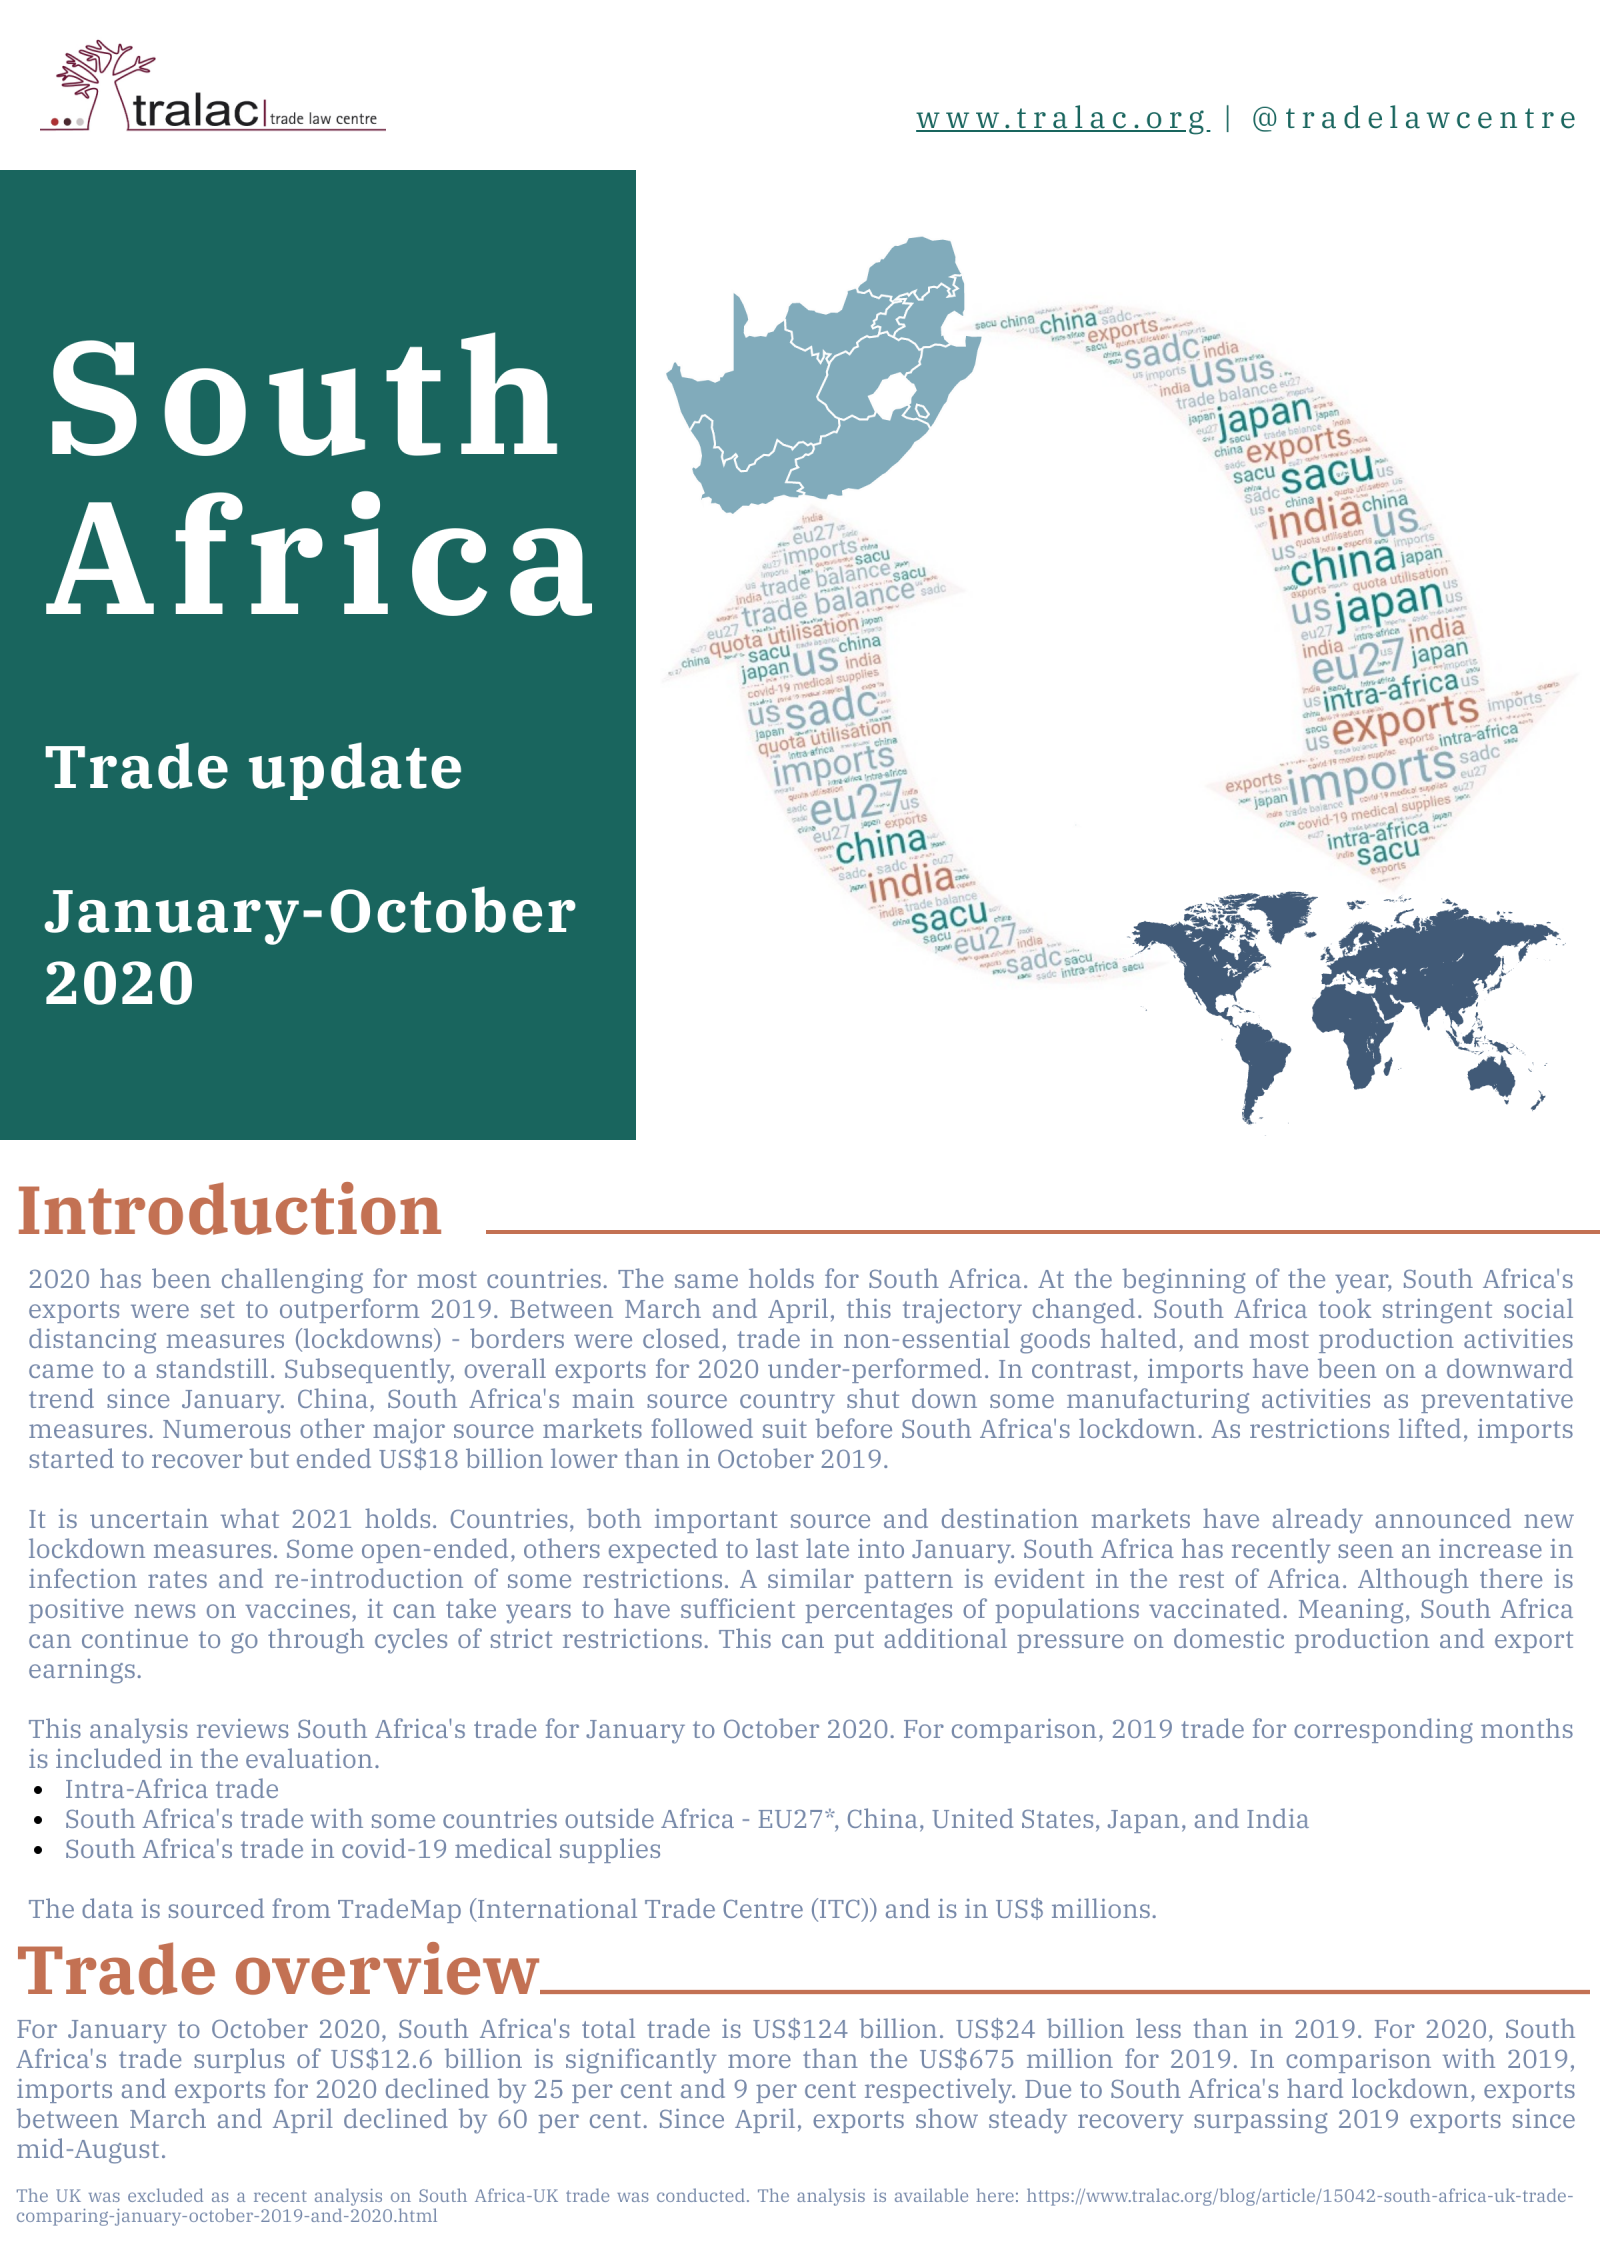 South Africa: Trade update, January-October 2020